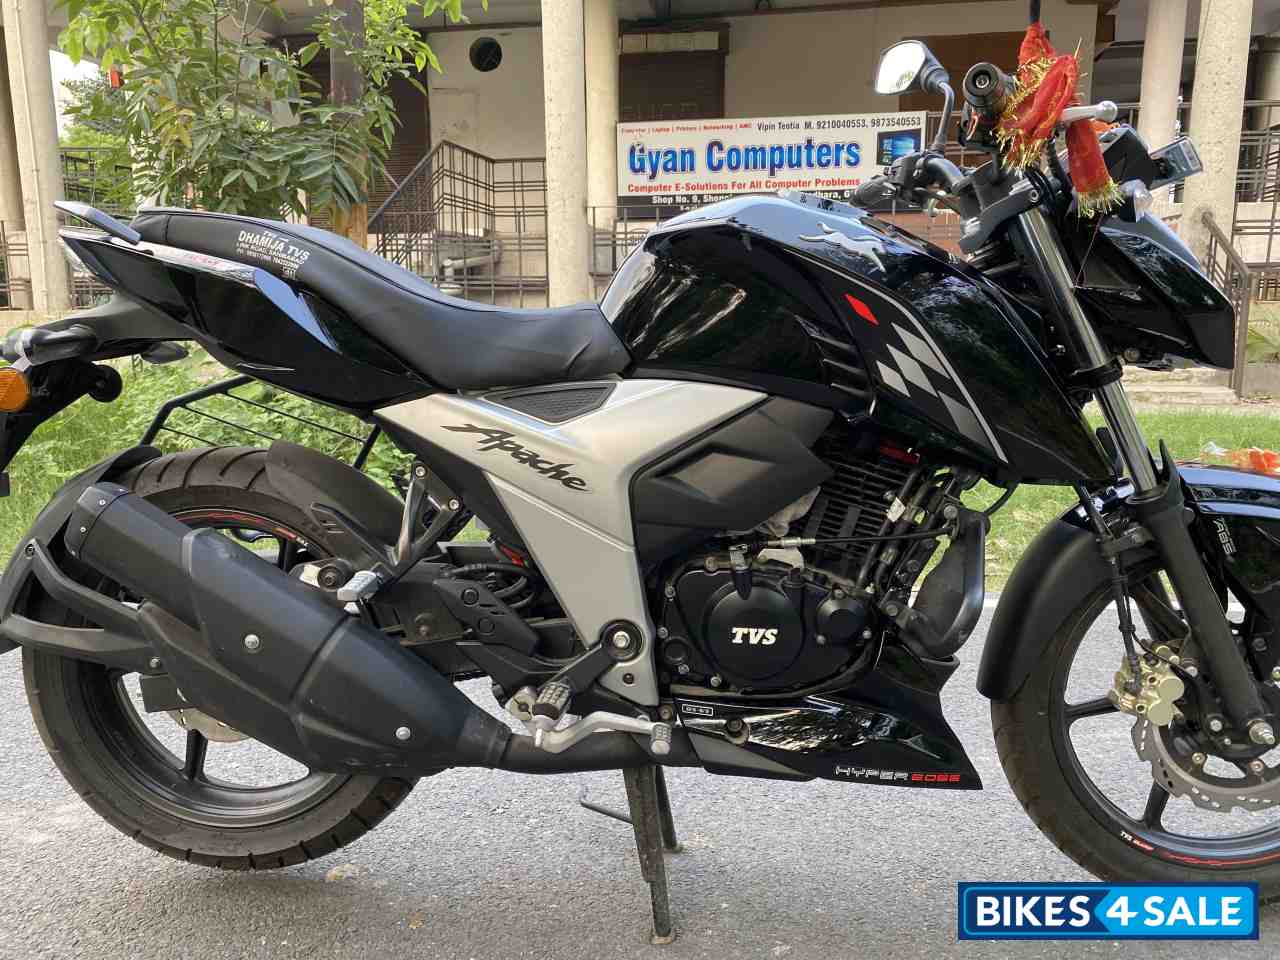 Used Model Tvs Apache Rtr 160 4v Bs6 For Sale In Ghaziabad Id Black Colour Bikes4sale